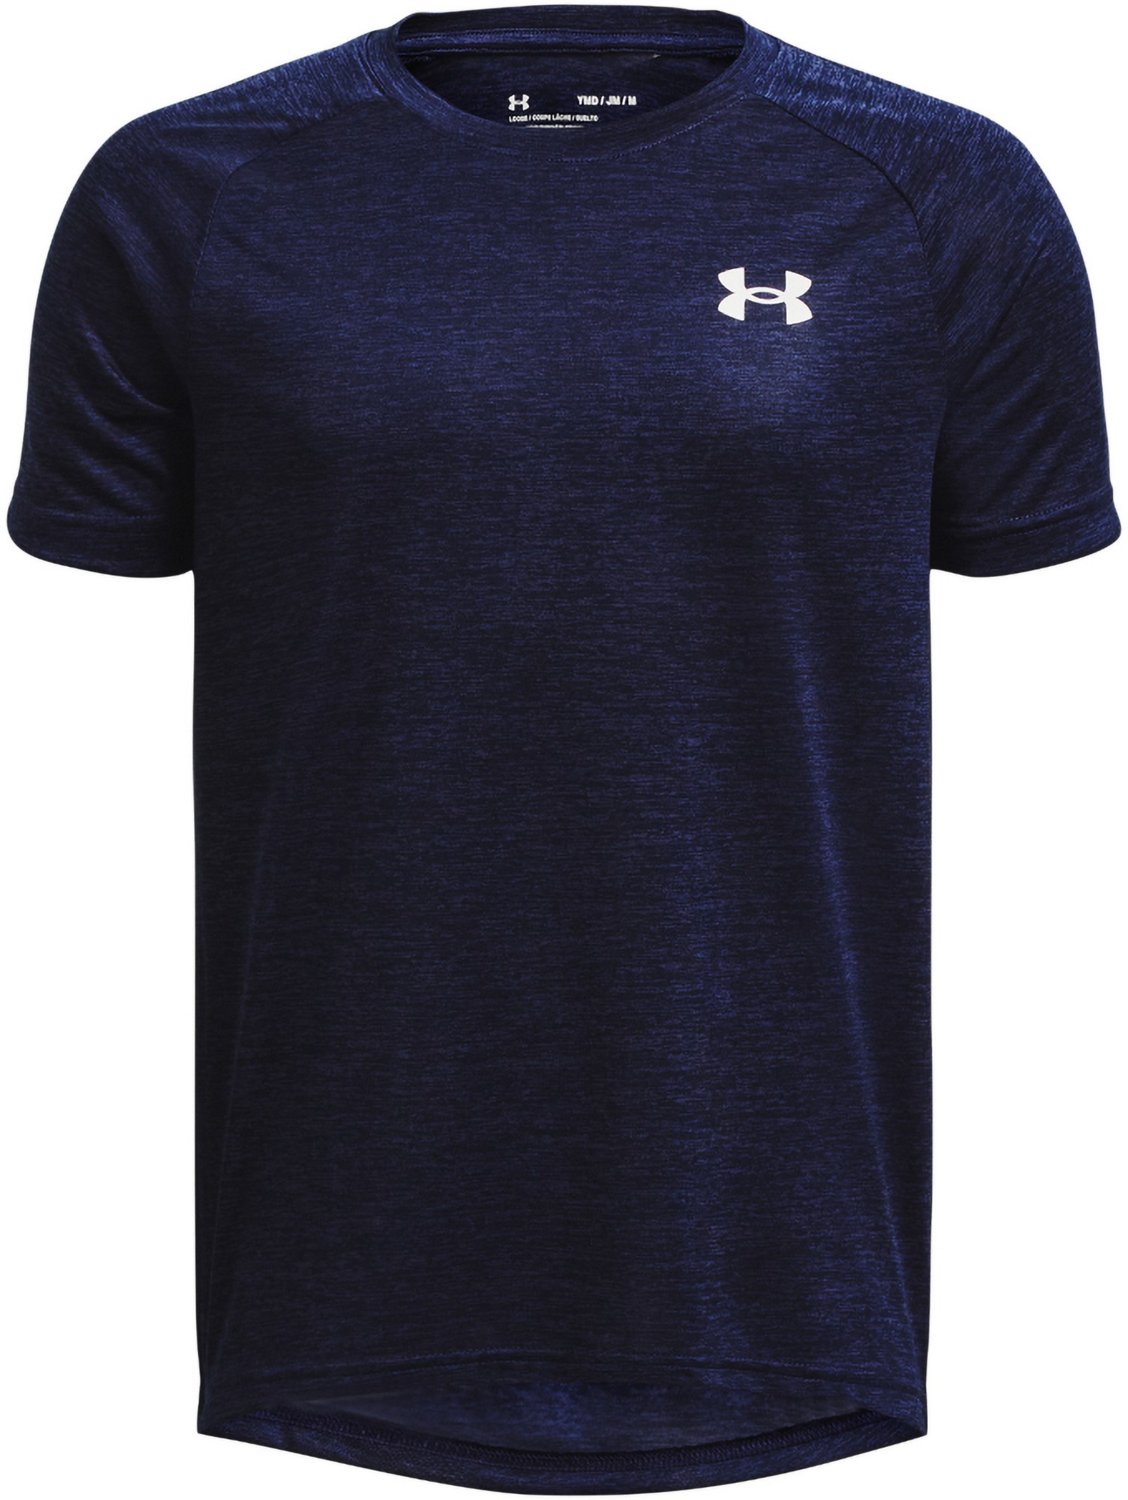 Under Armour Boys' UA Tech 2.0 Short Sleeve T-Shirt                                                                              - view number 1 selected